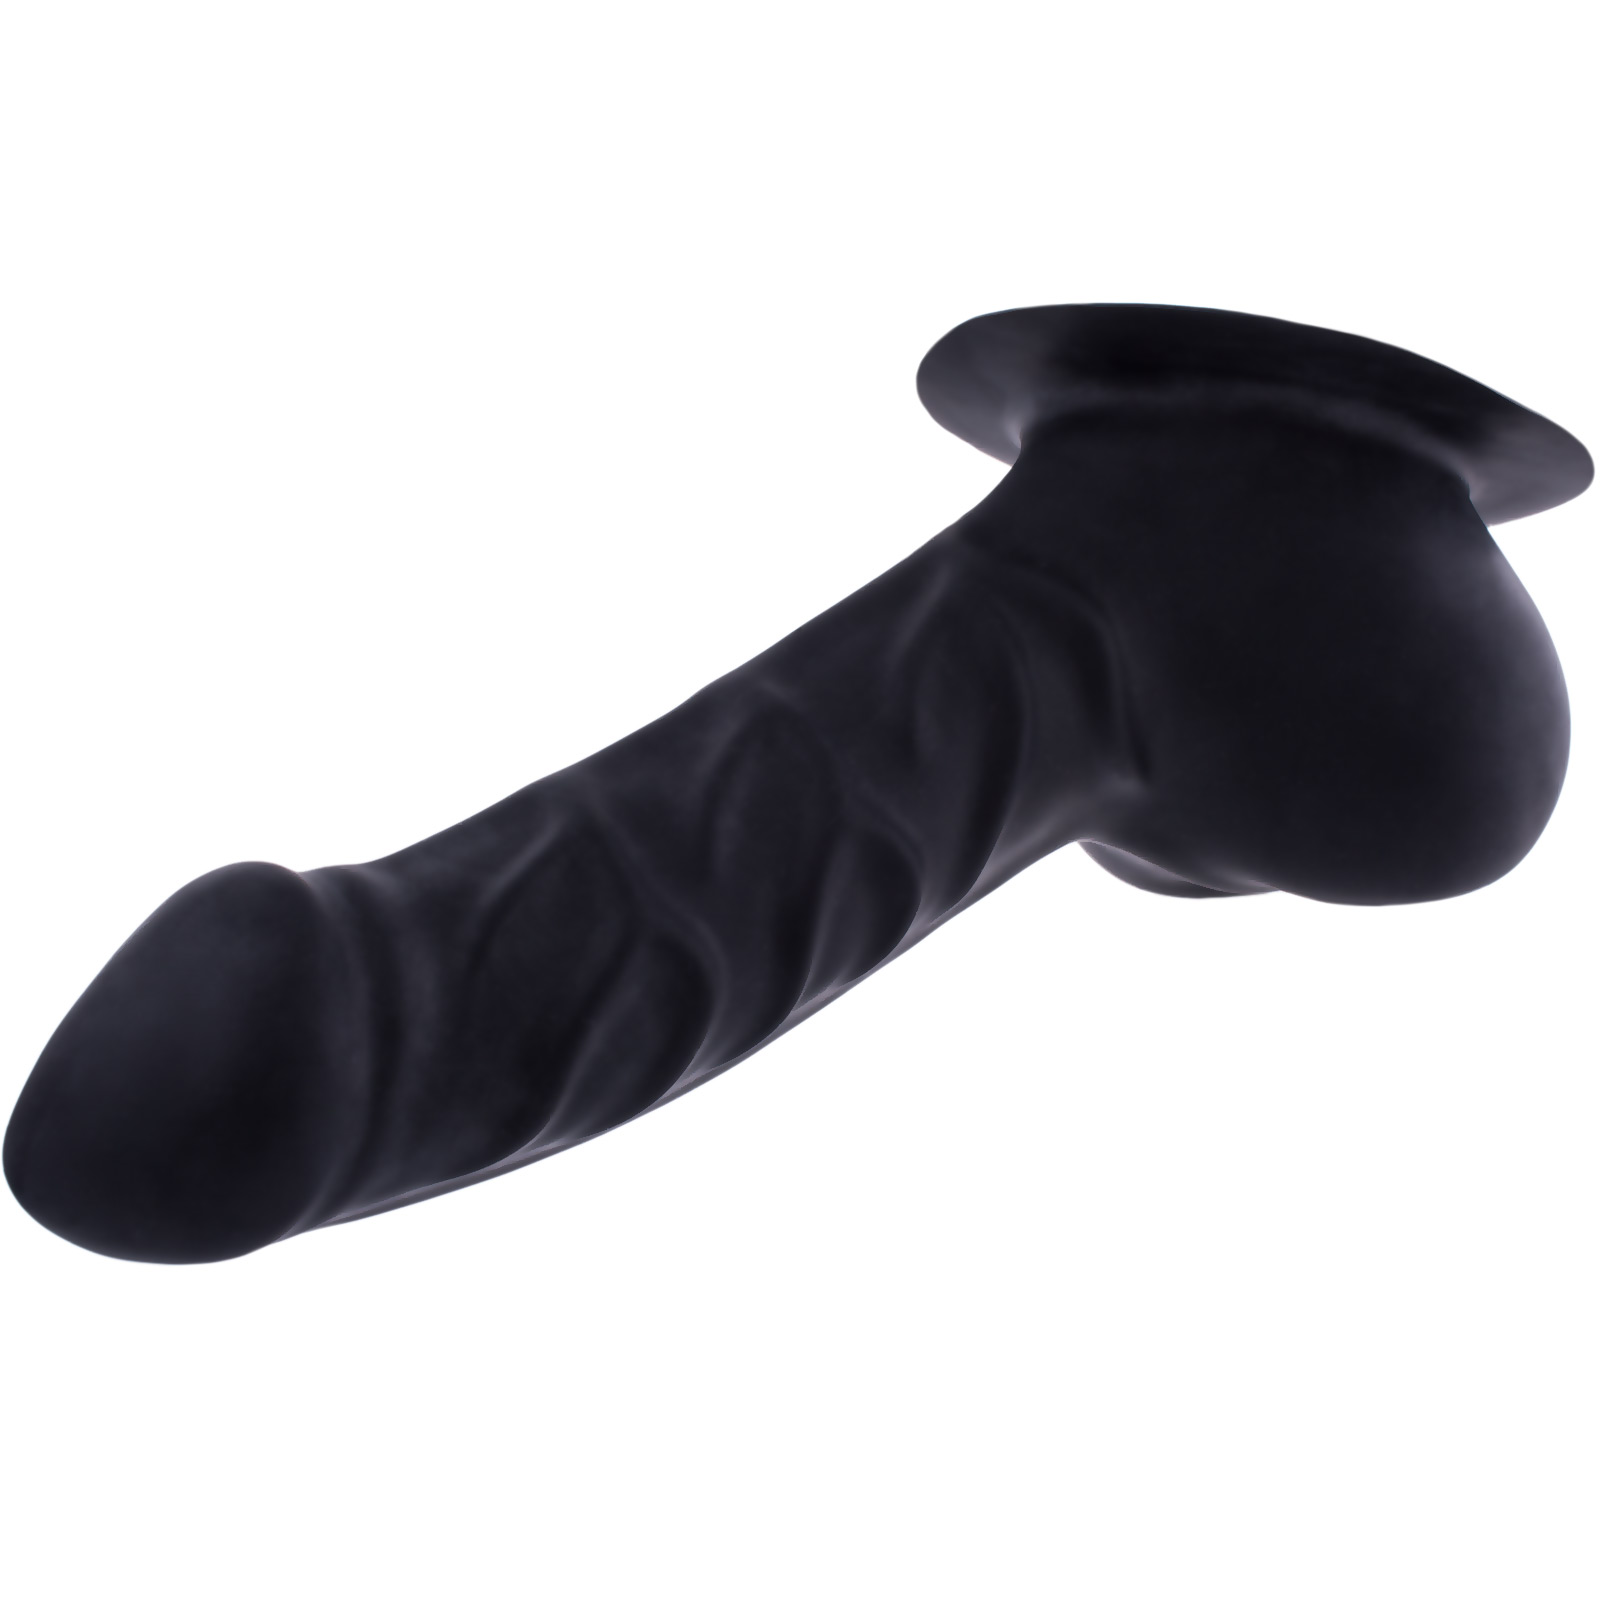 Toylie Latex Penis Sleeve «FRANZ» black, with base plate for sticking to latex clothing - suitable for vegans